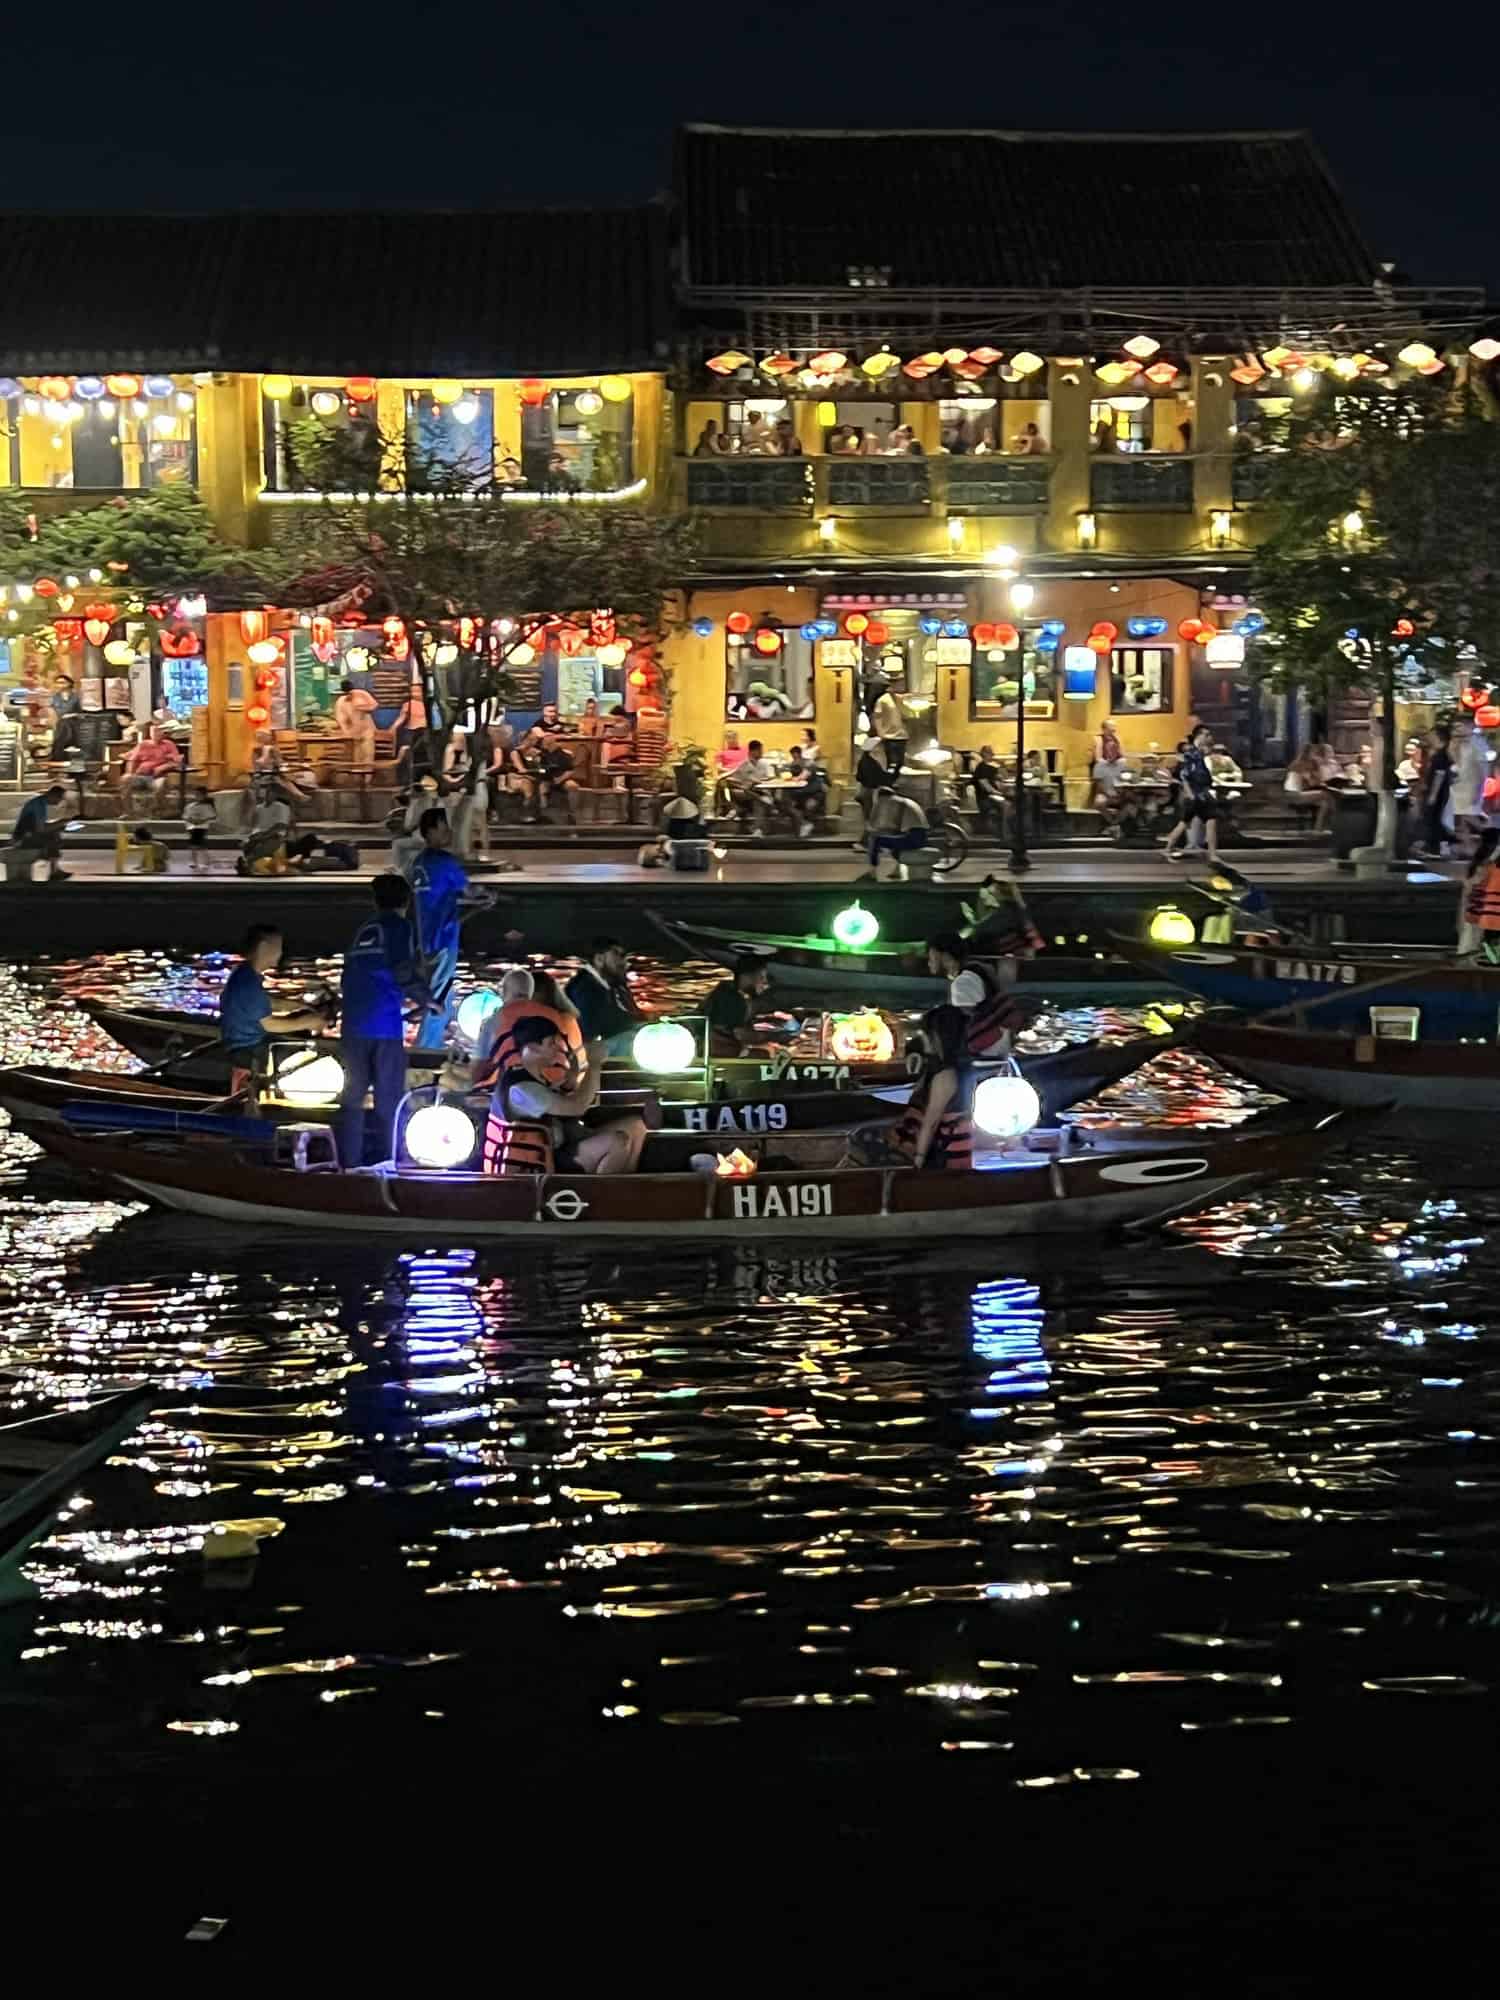 Boats on the river in old Hoi An, Vietnam with people releasing lanterns